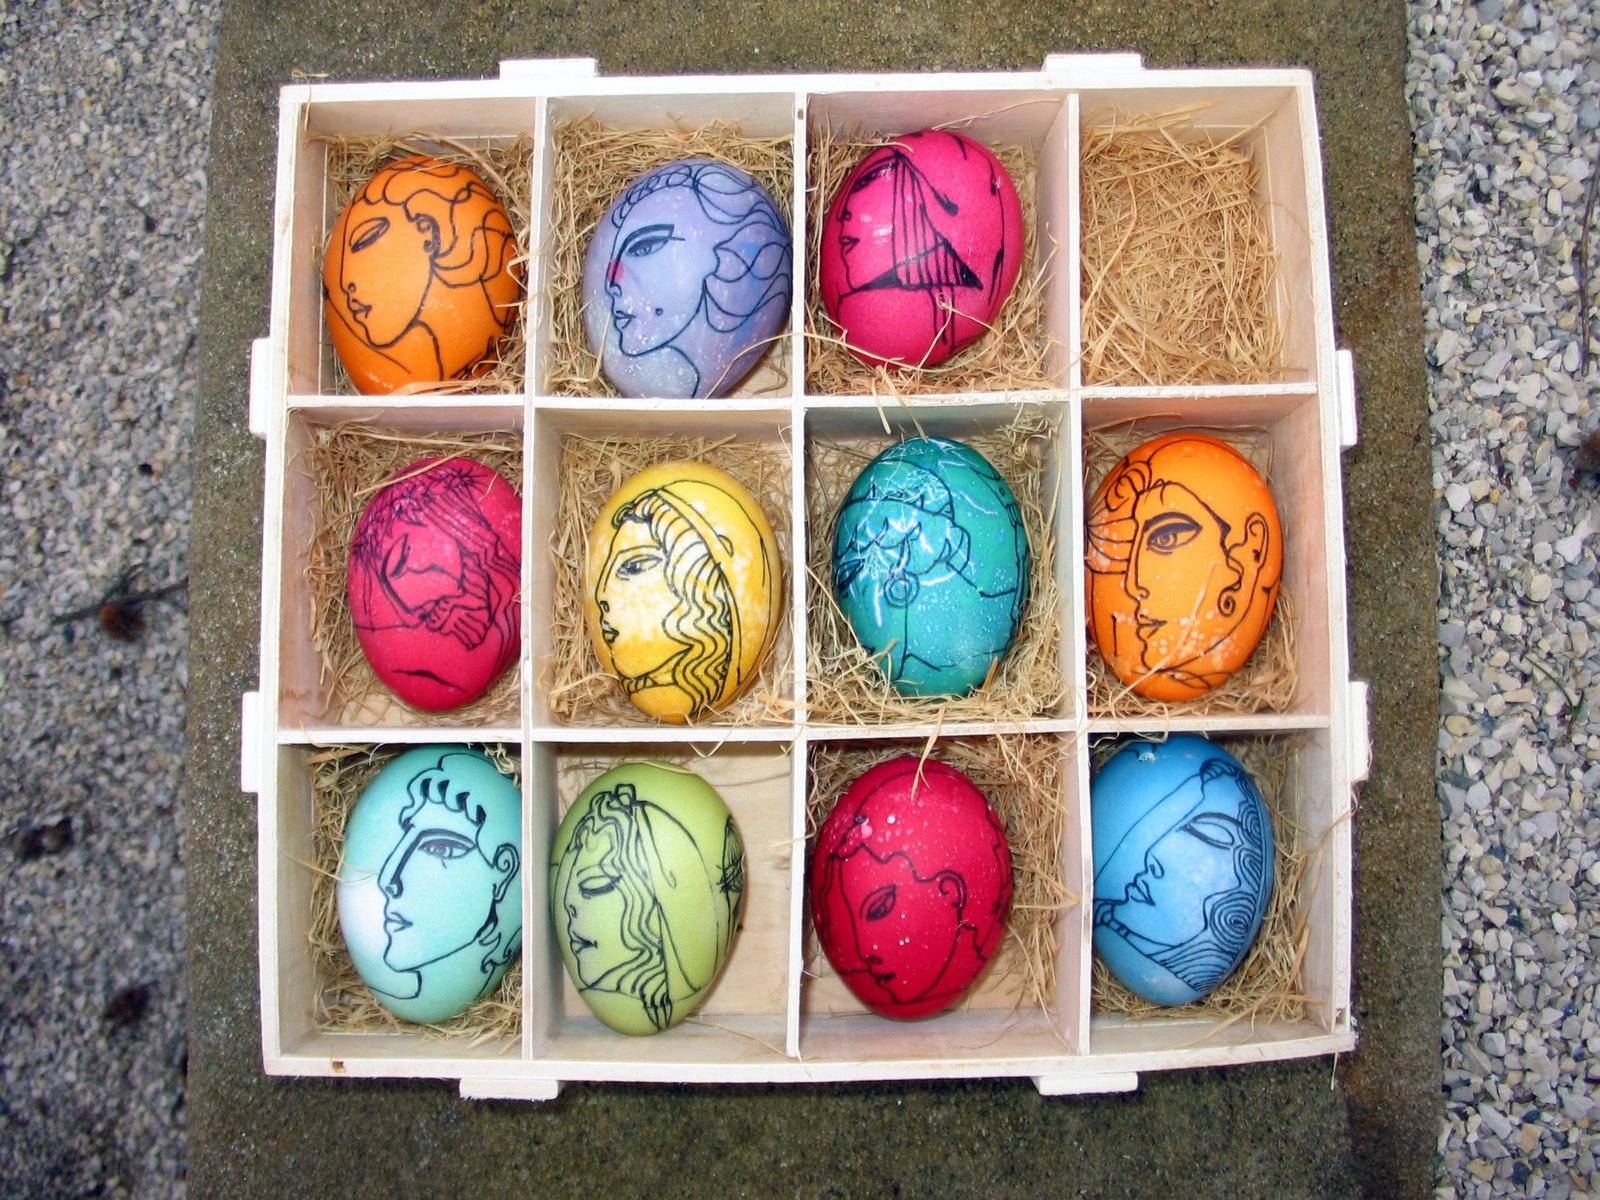 a box filled with eggs painted to look like characters